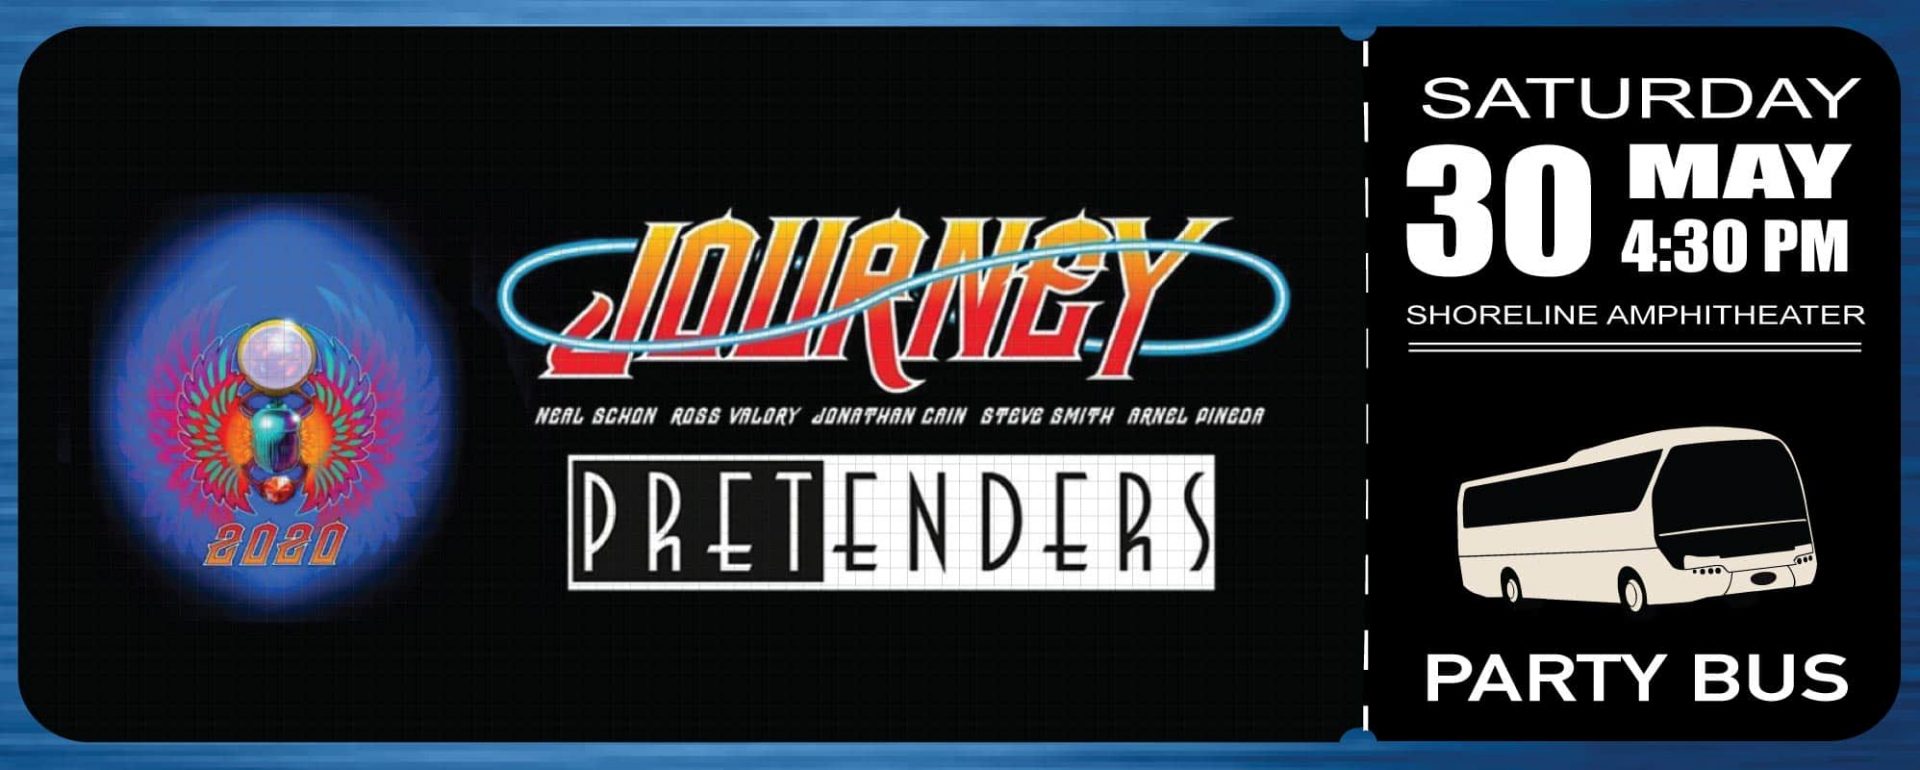 Journey and The Pretenders Concert Shuttle